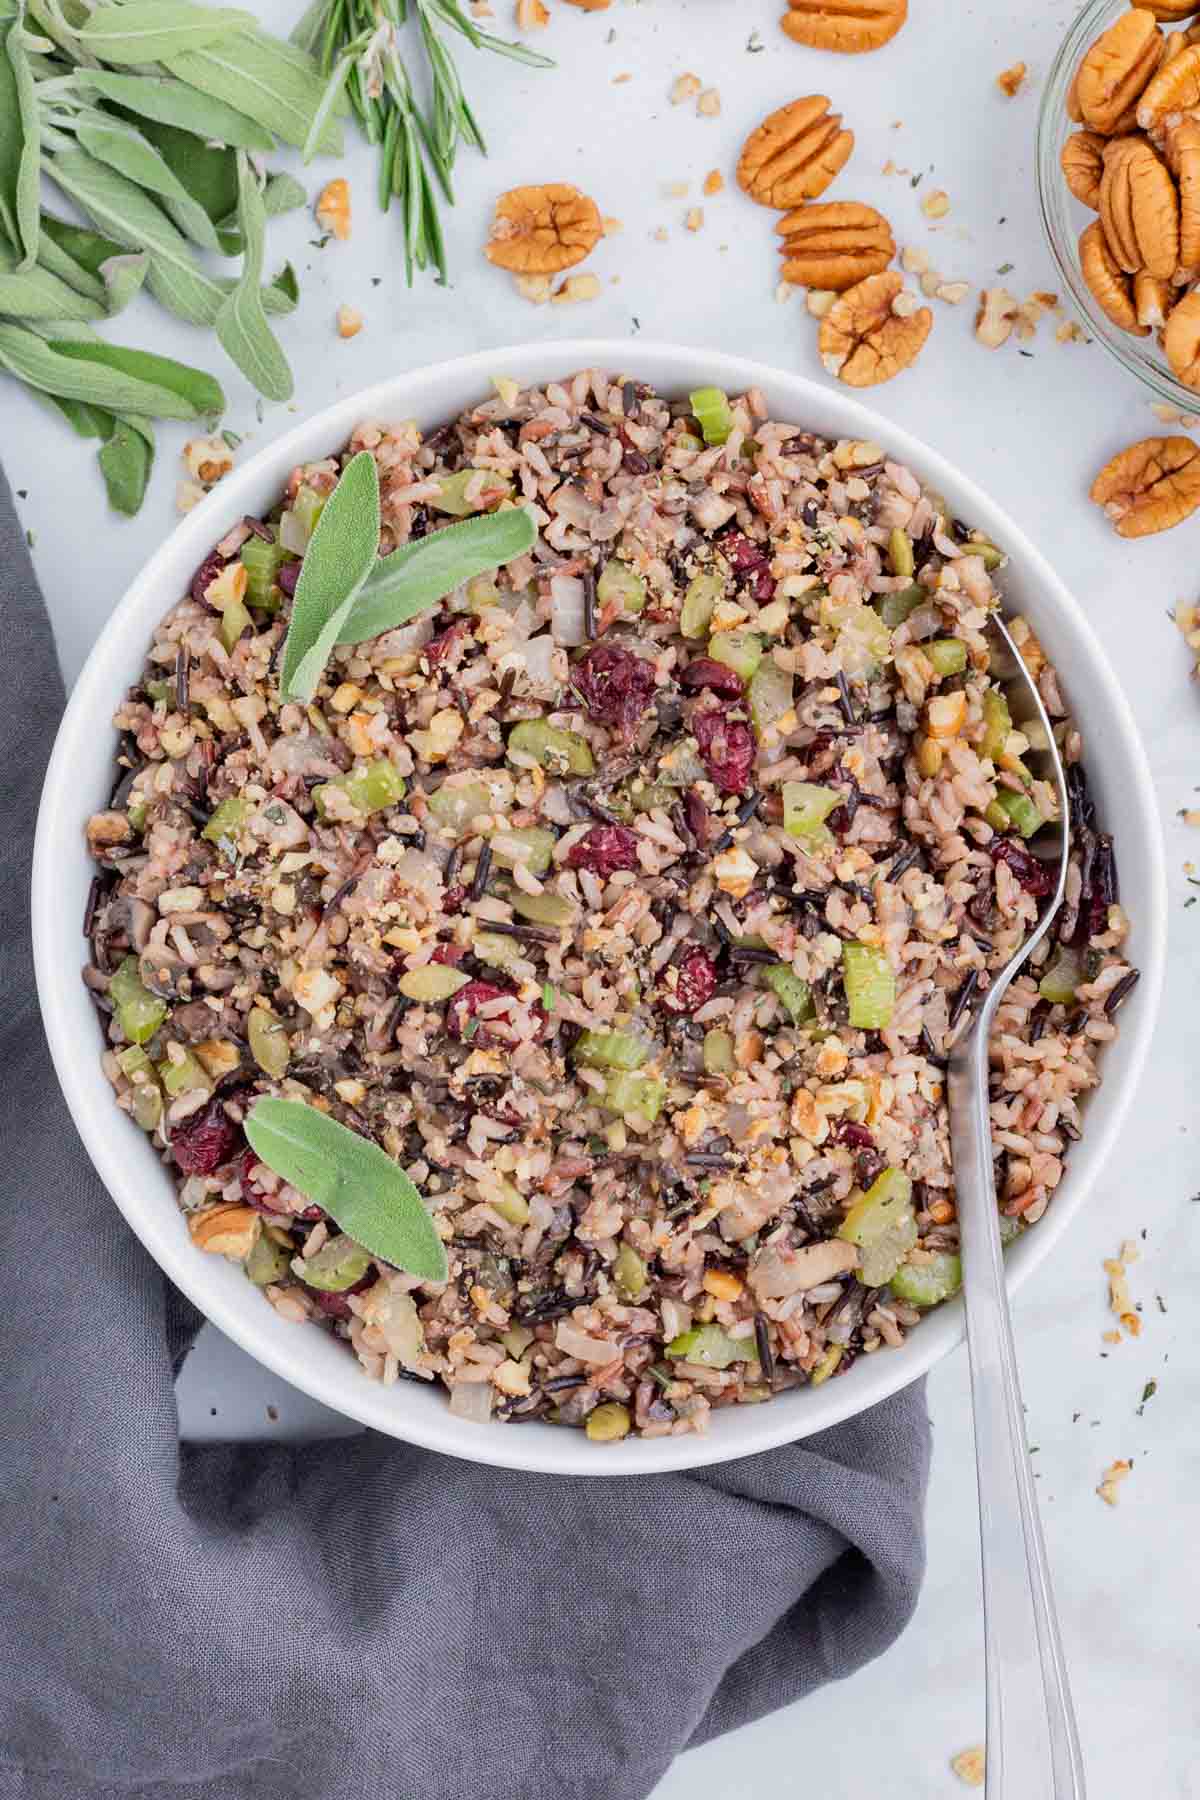 A spoon is used to dig into a bowl of wild rice stuffing.